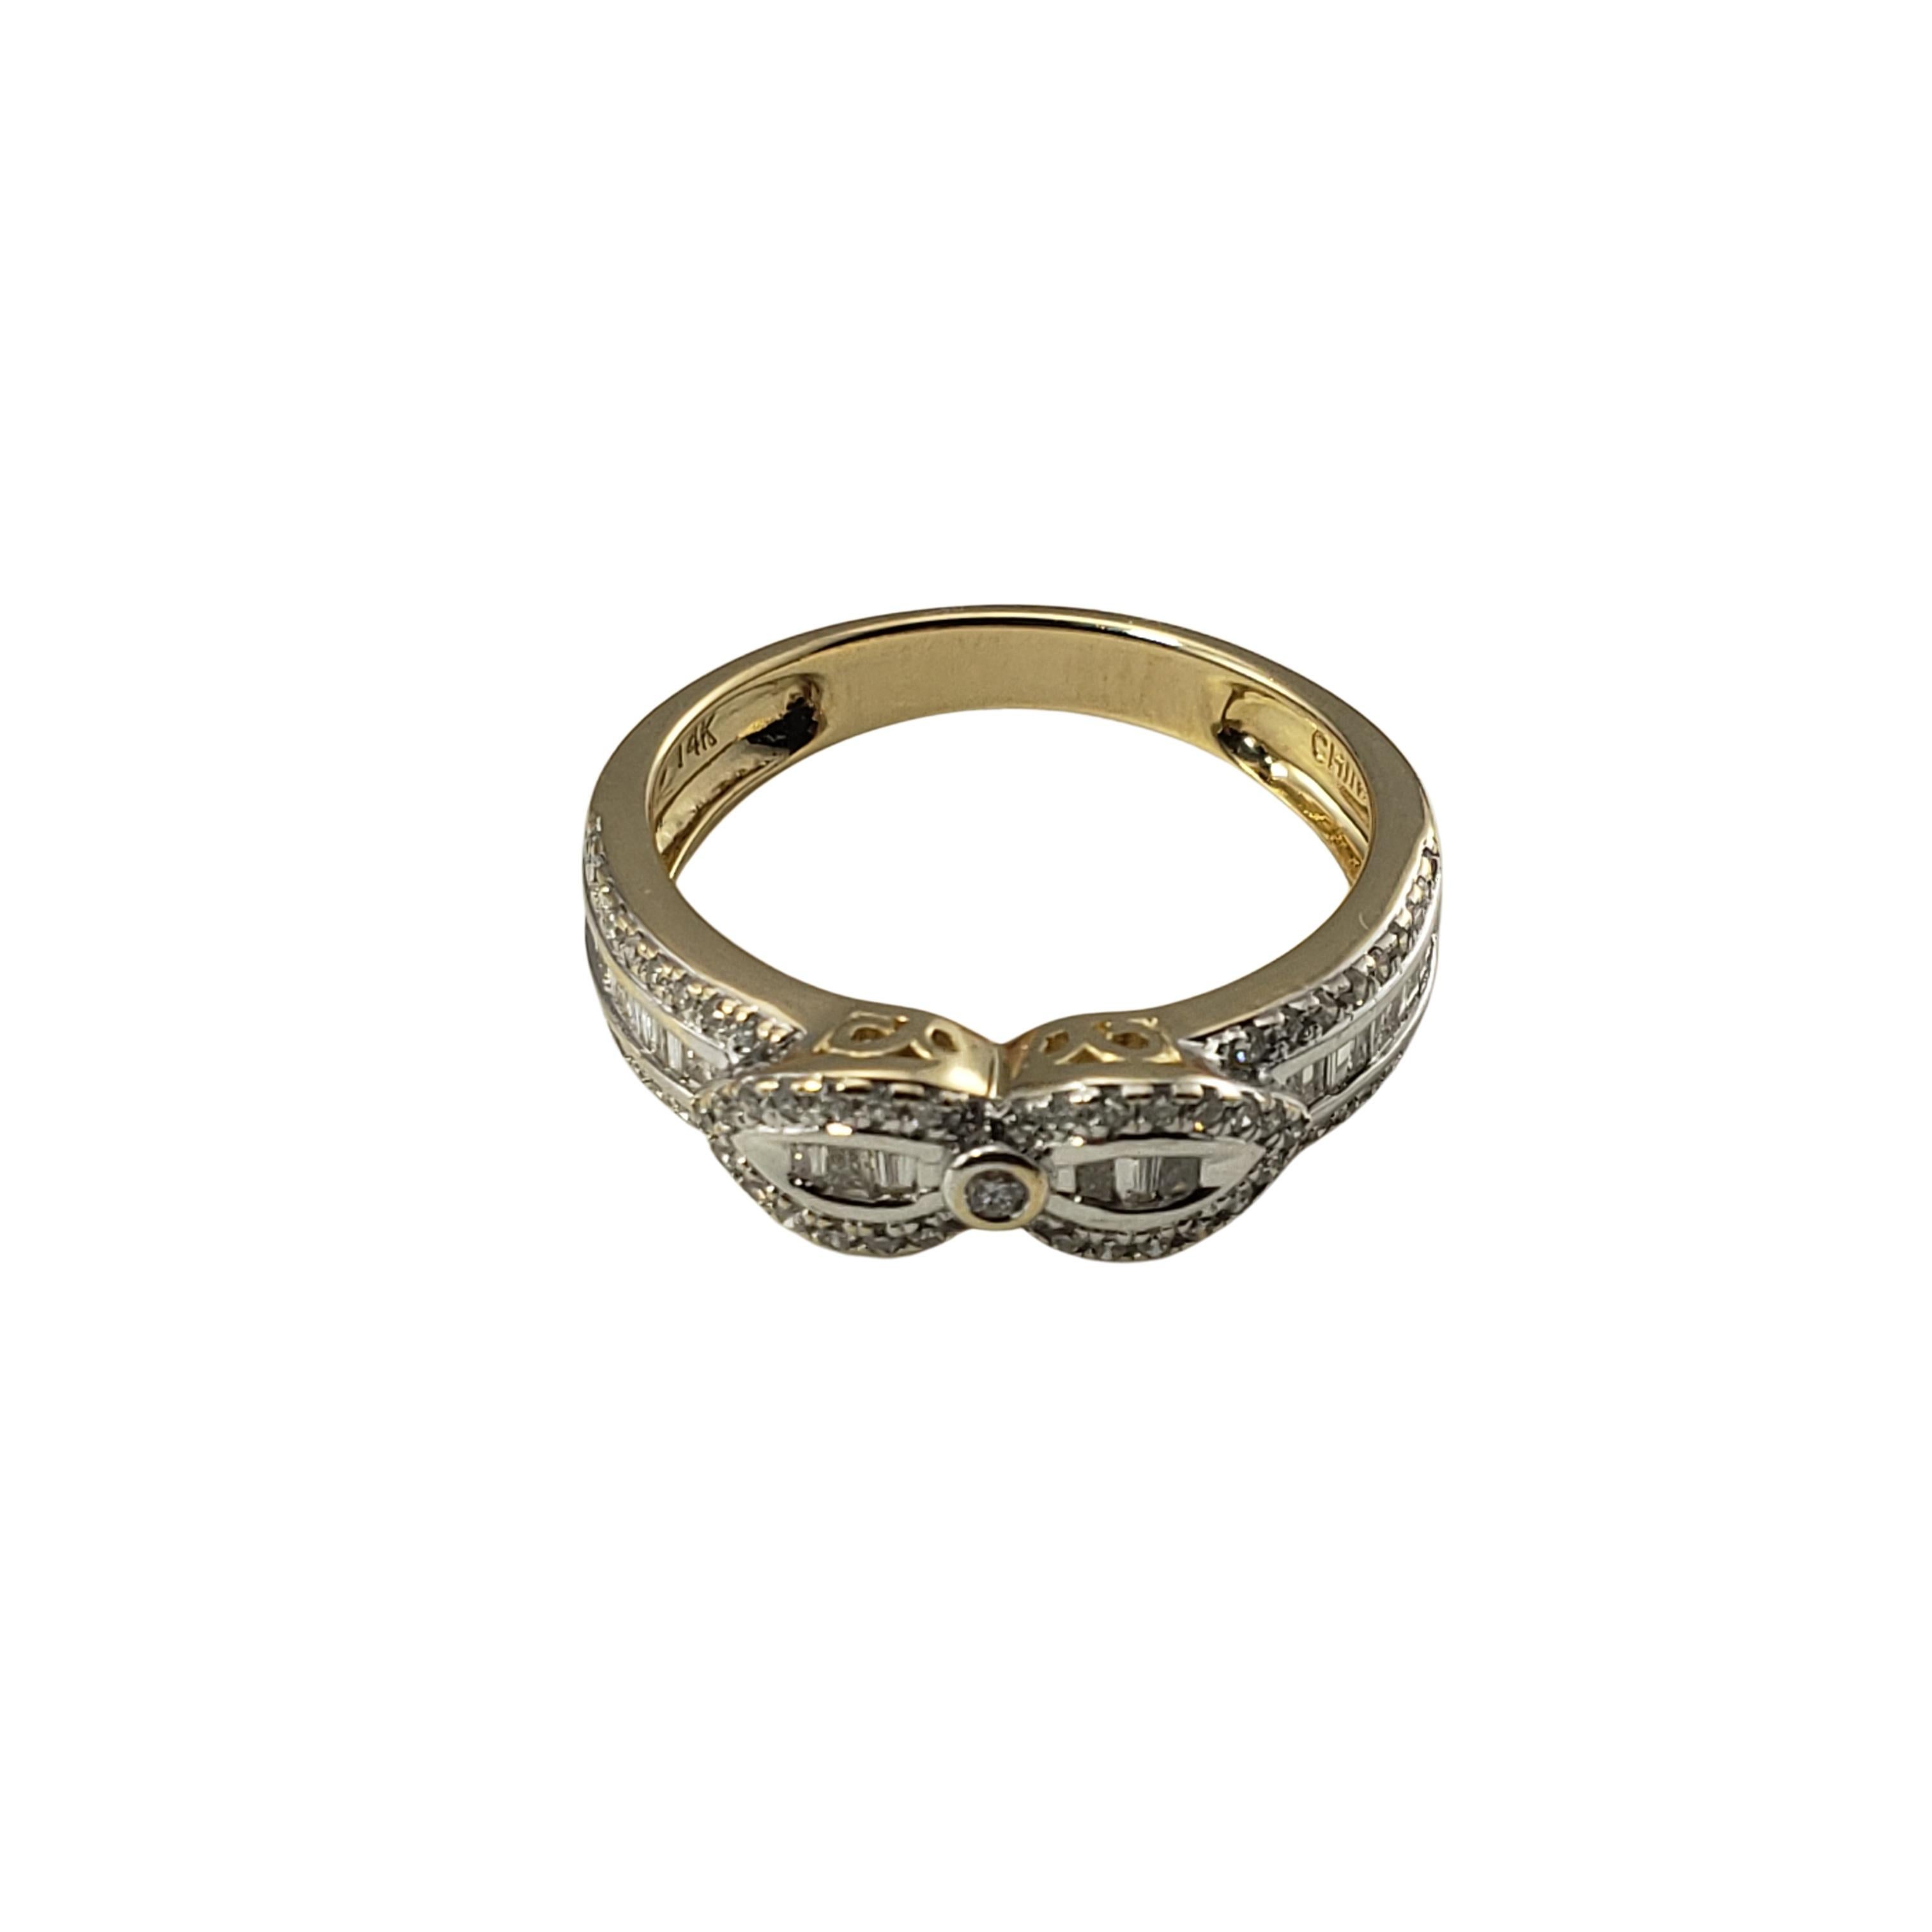 14 Karat Yellow Gold and Diamond Ring Size 6-

This sparkling ring features 26 baguette diamonds and 65 round single cut diamonds set in beautifully detailed 14K yellow gold.  Width:  5 mm.  Shank:  3 mm.

Approximate total diamond weight:  .64